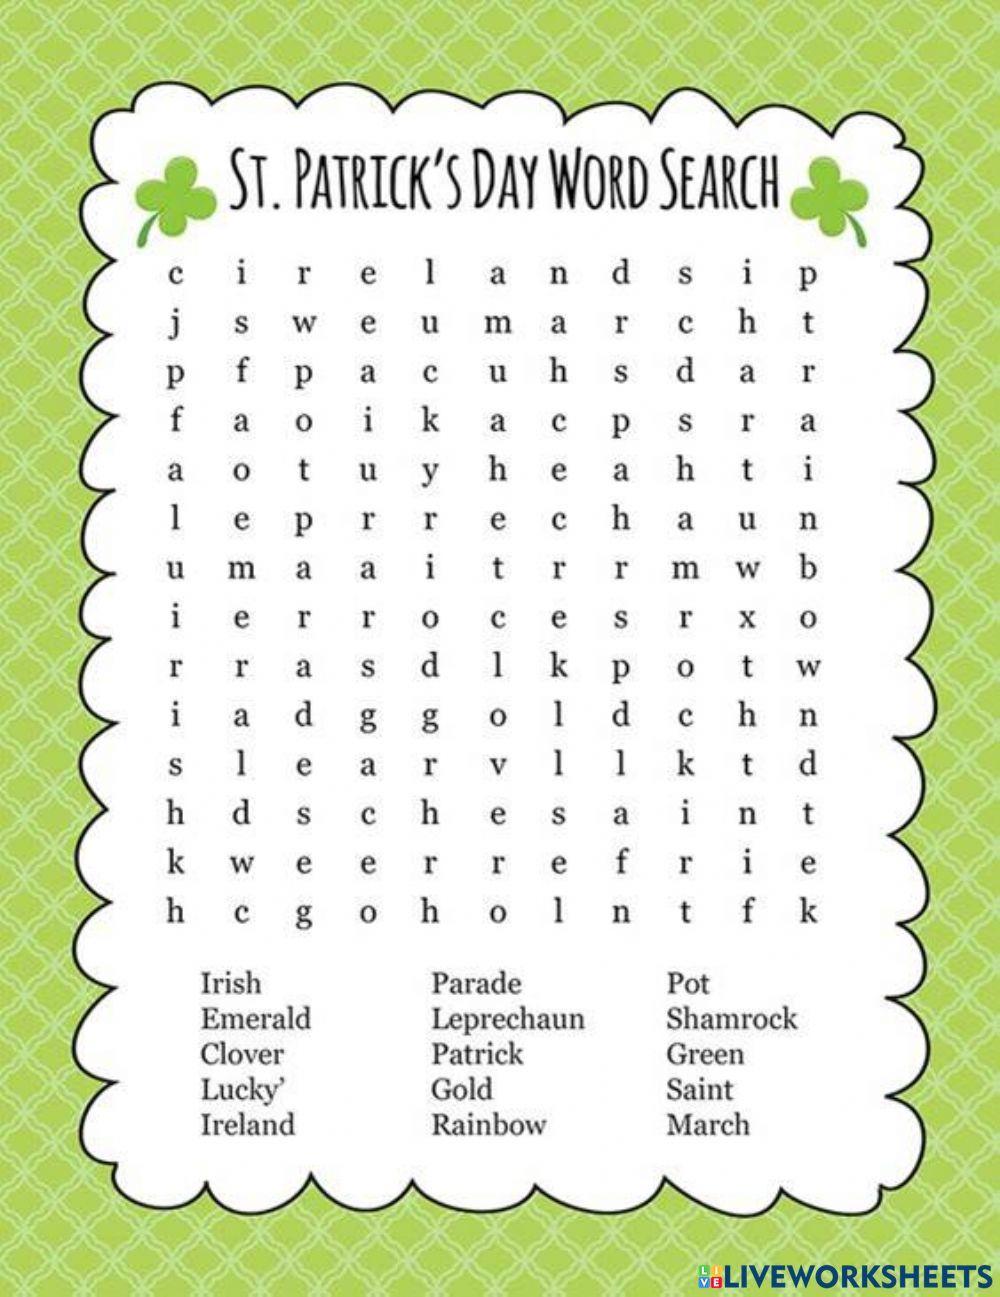 ST. PATRICKS DAY WORD SEARCH